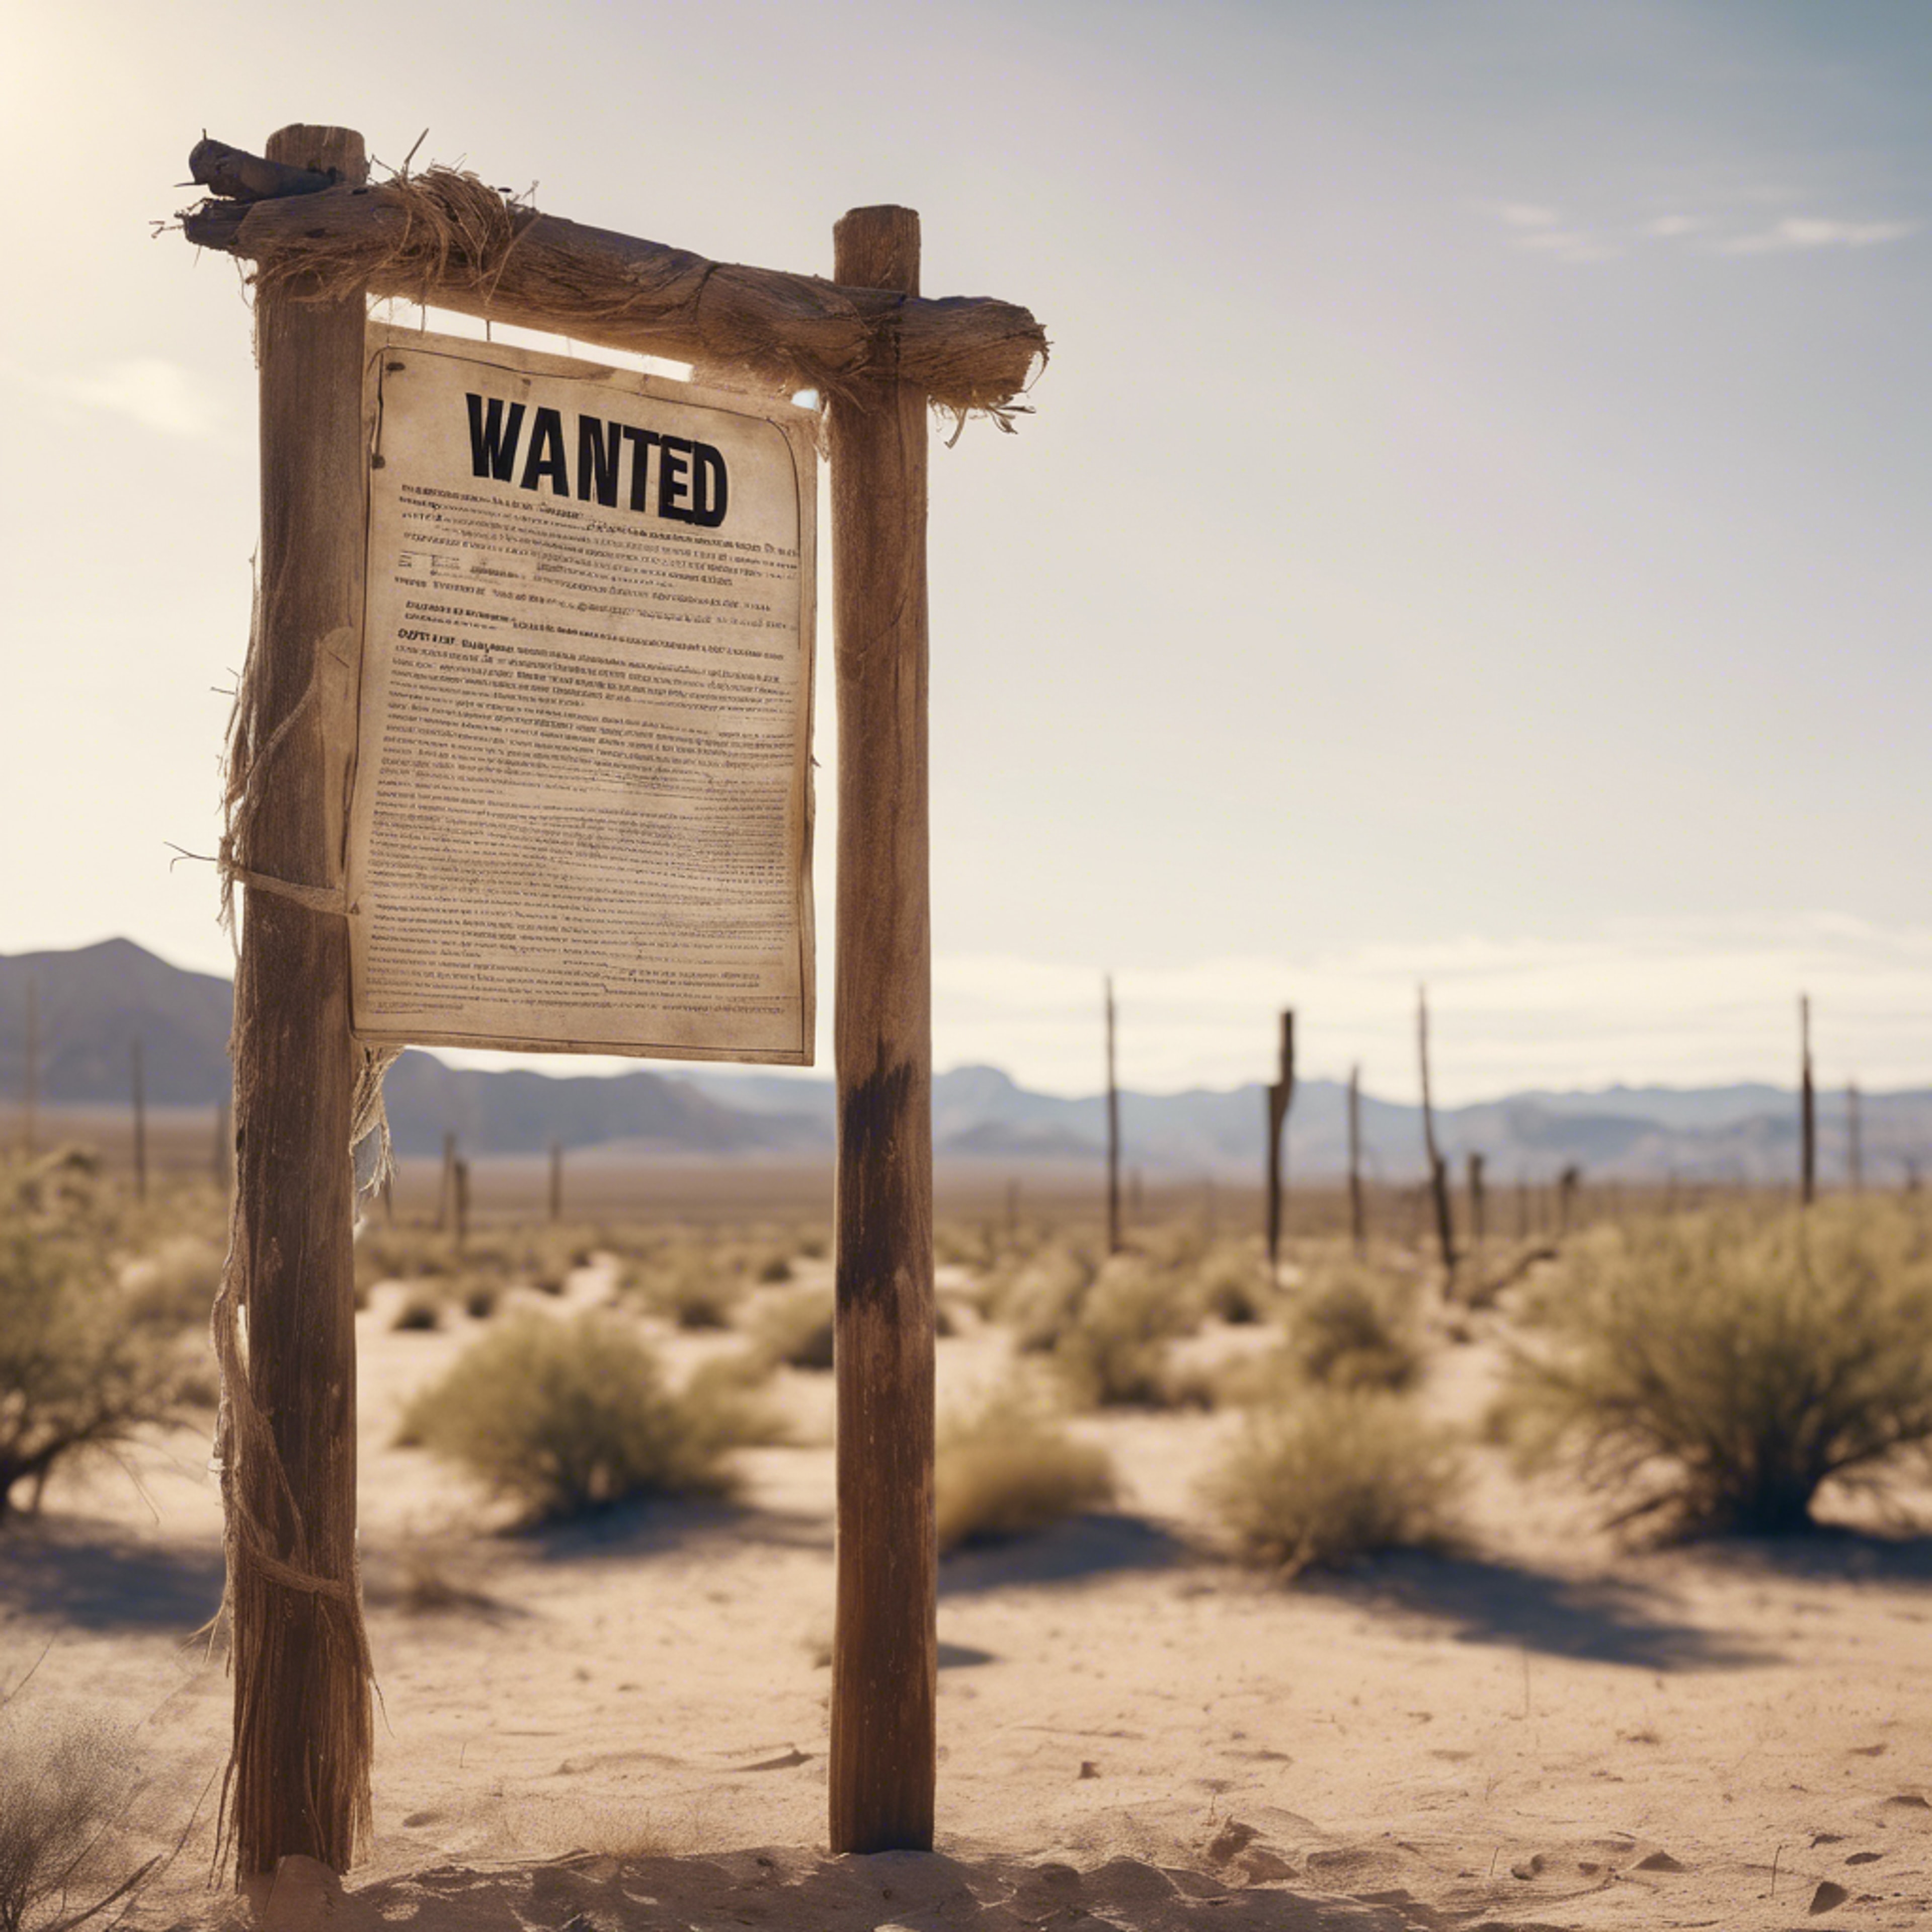 A wanted poster nailed to wooden post in a windy desert town, offering a reward in bold letters. 墙纸[1e032392f4784d5094da]